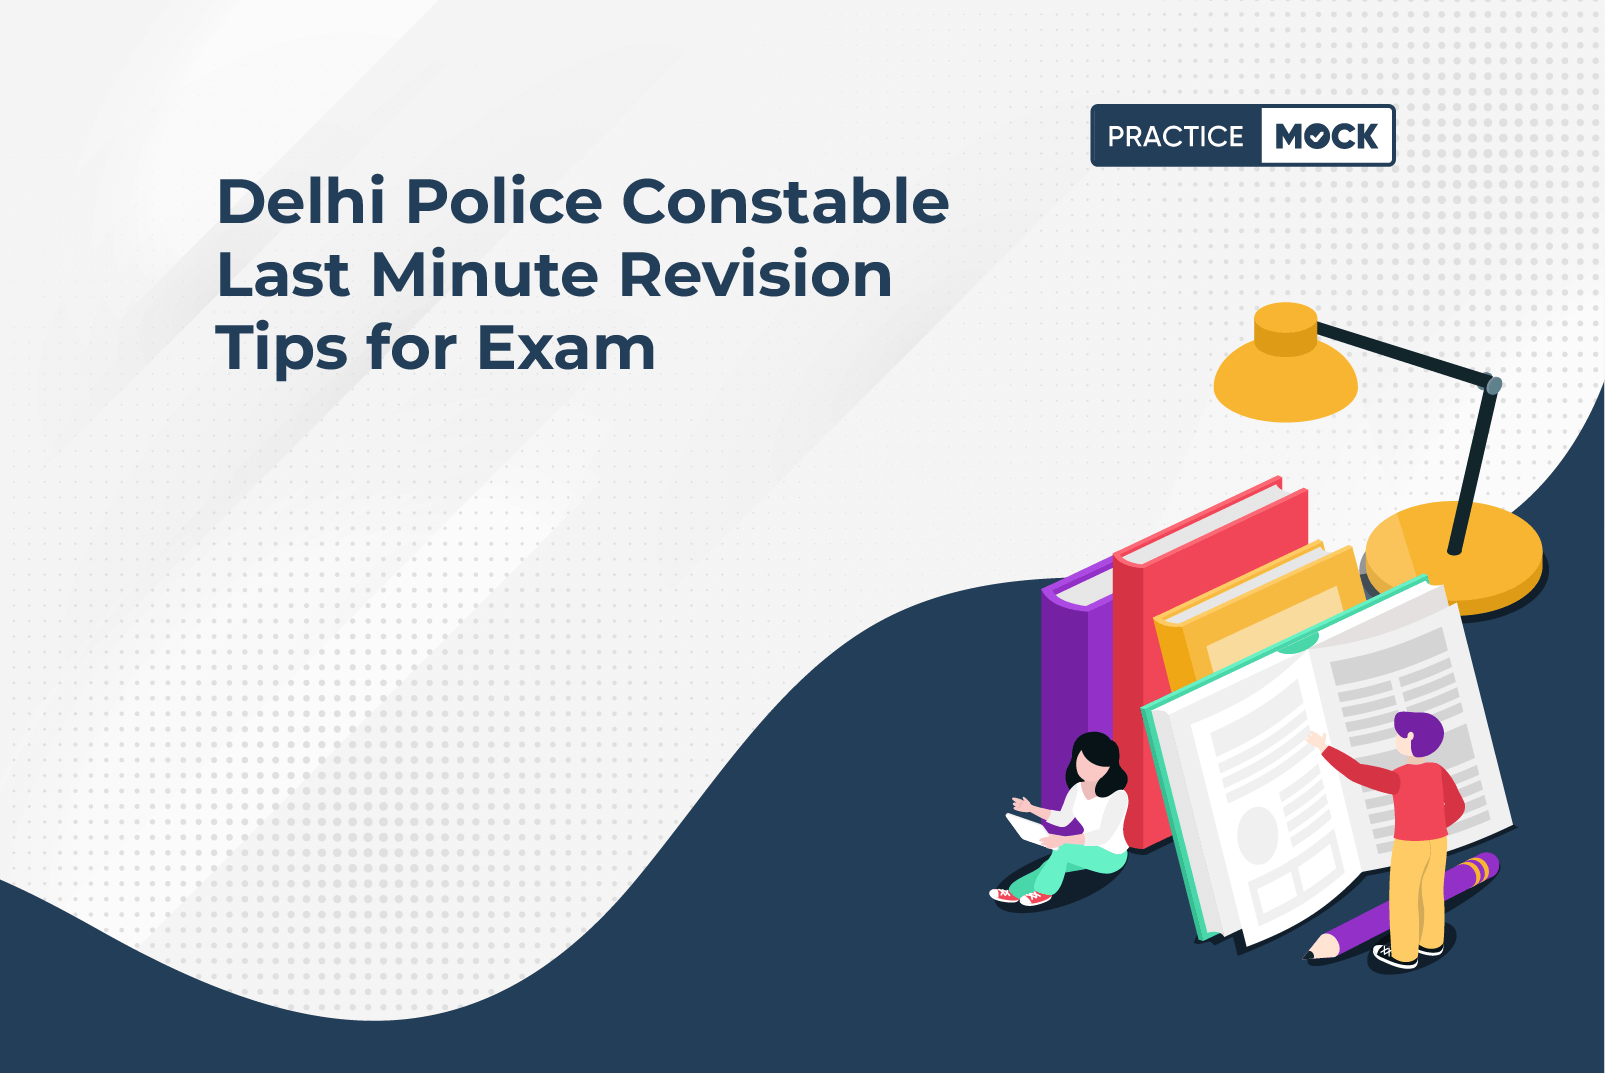 Delhi Police Constable Last Minute Revision Tips for Exam